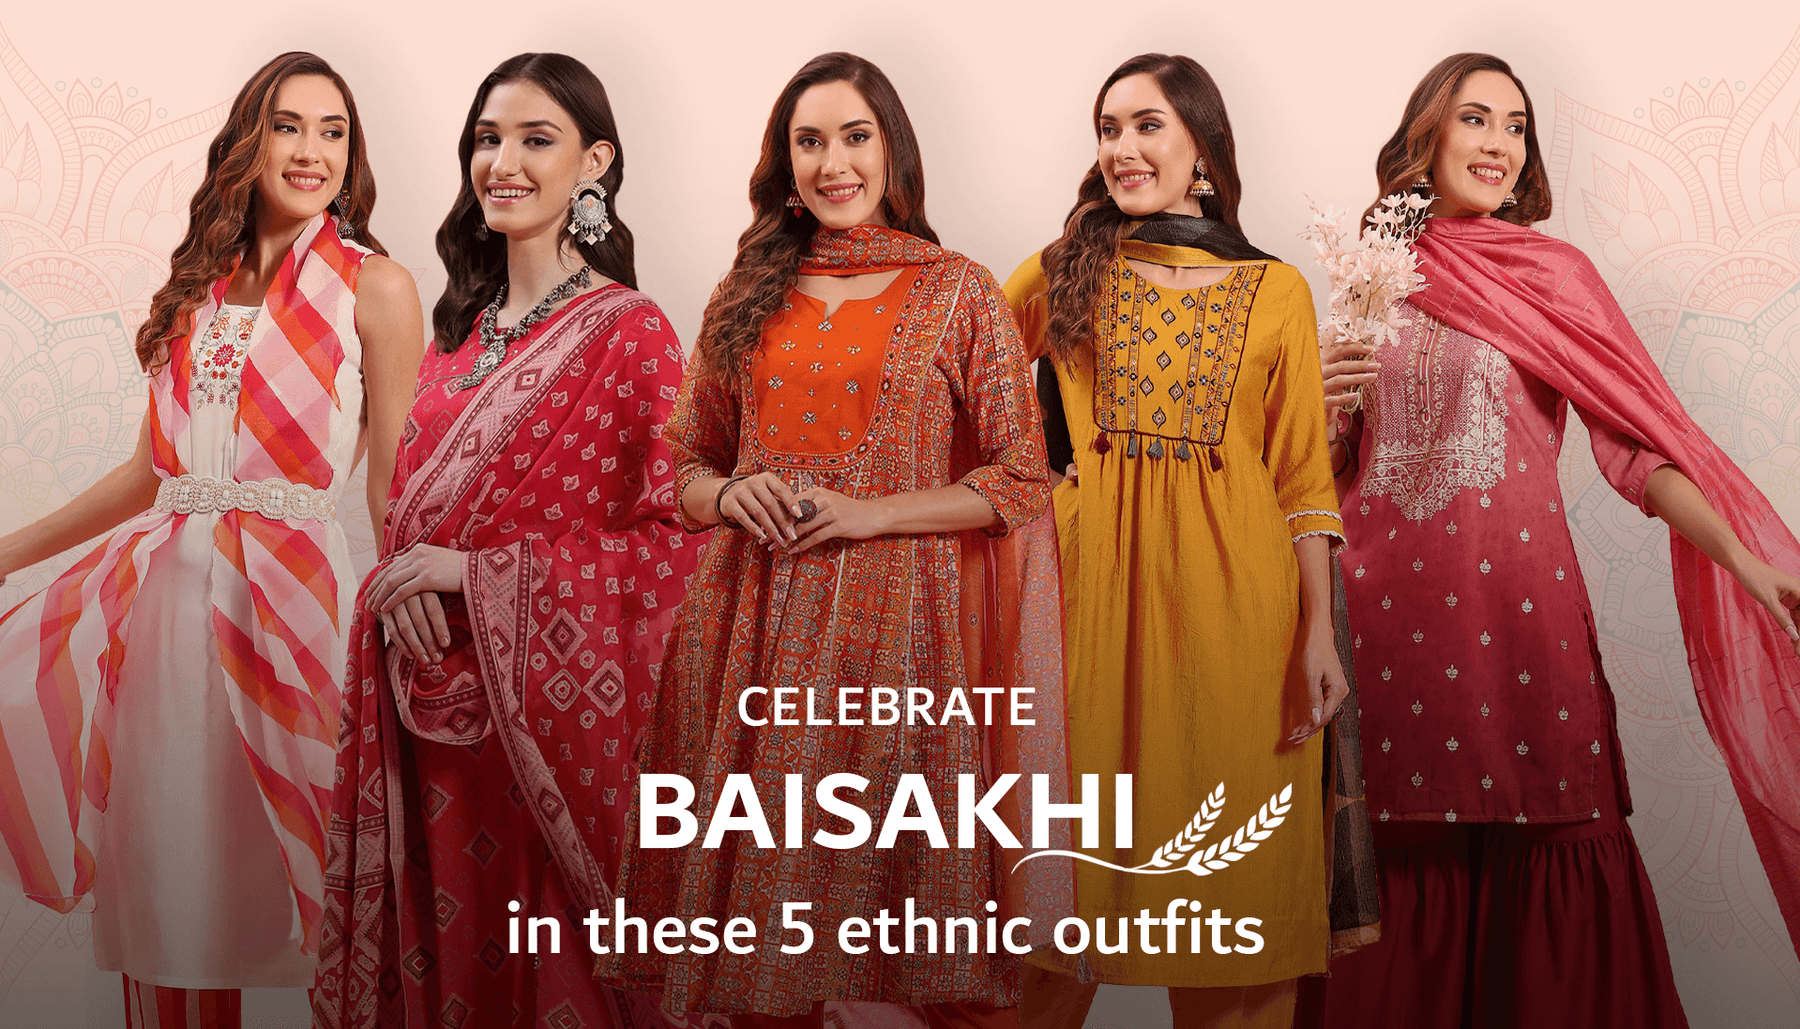 Top 5 Baisakhi Outfits from Shree, Read Blog